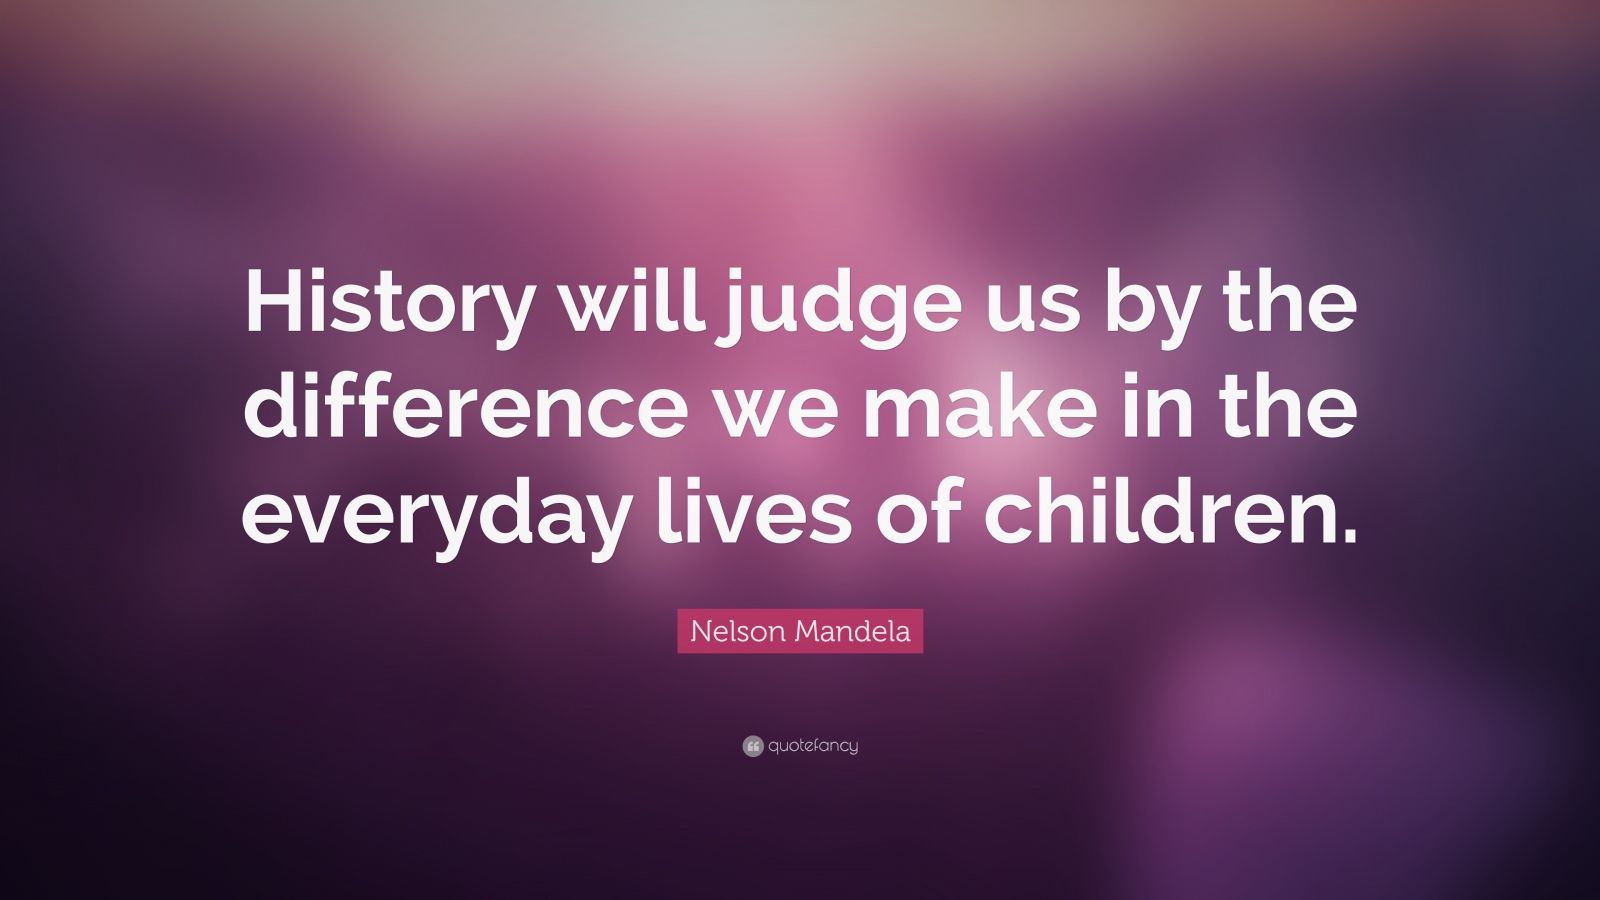 Nelson Mandela Quote: “History will judge us by the difference we make